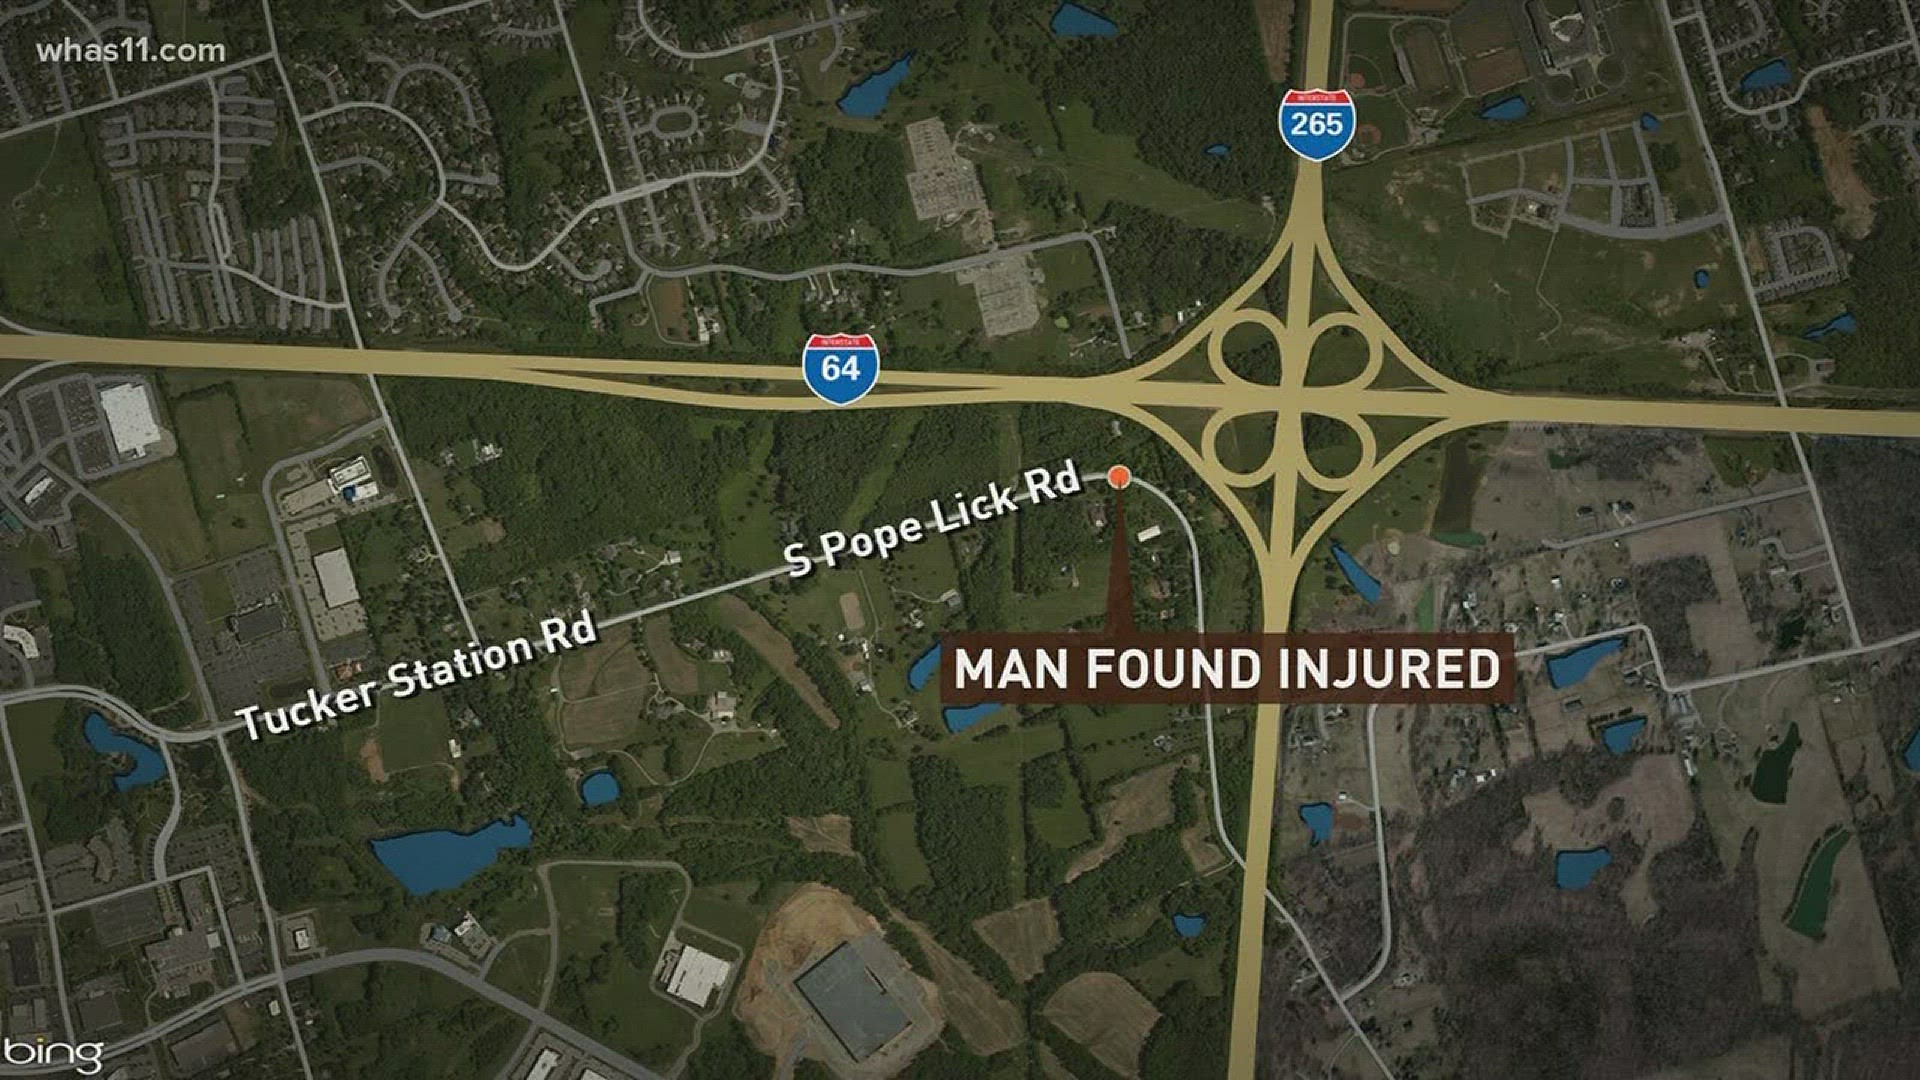 Man dies after being injured near S. Pope Lick Road